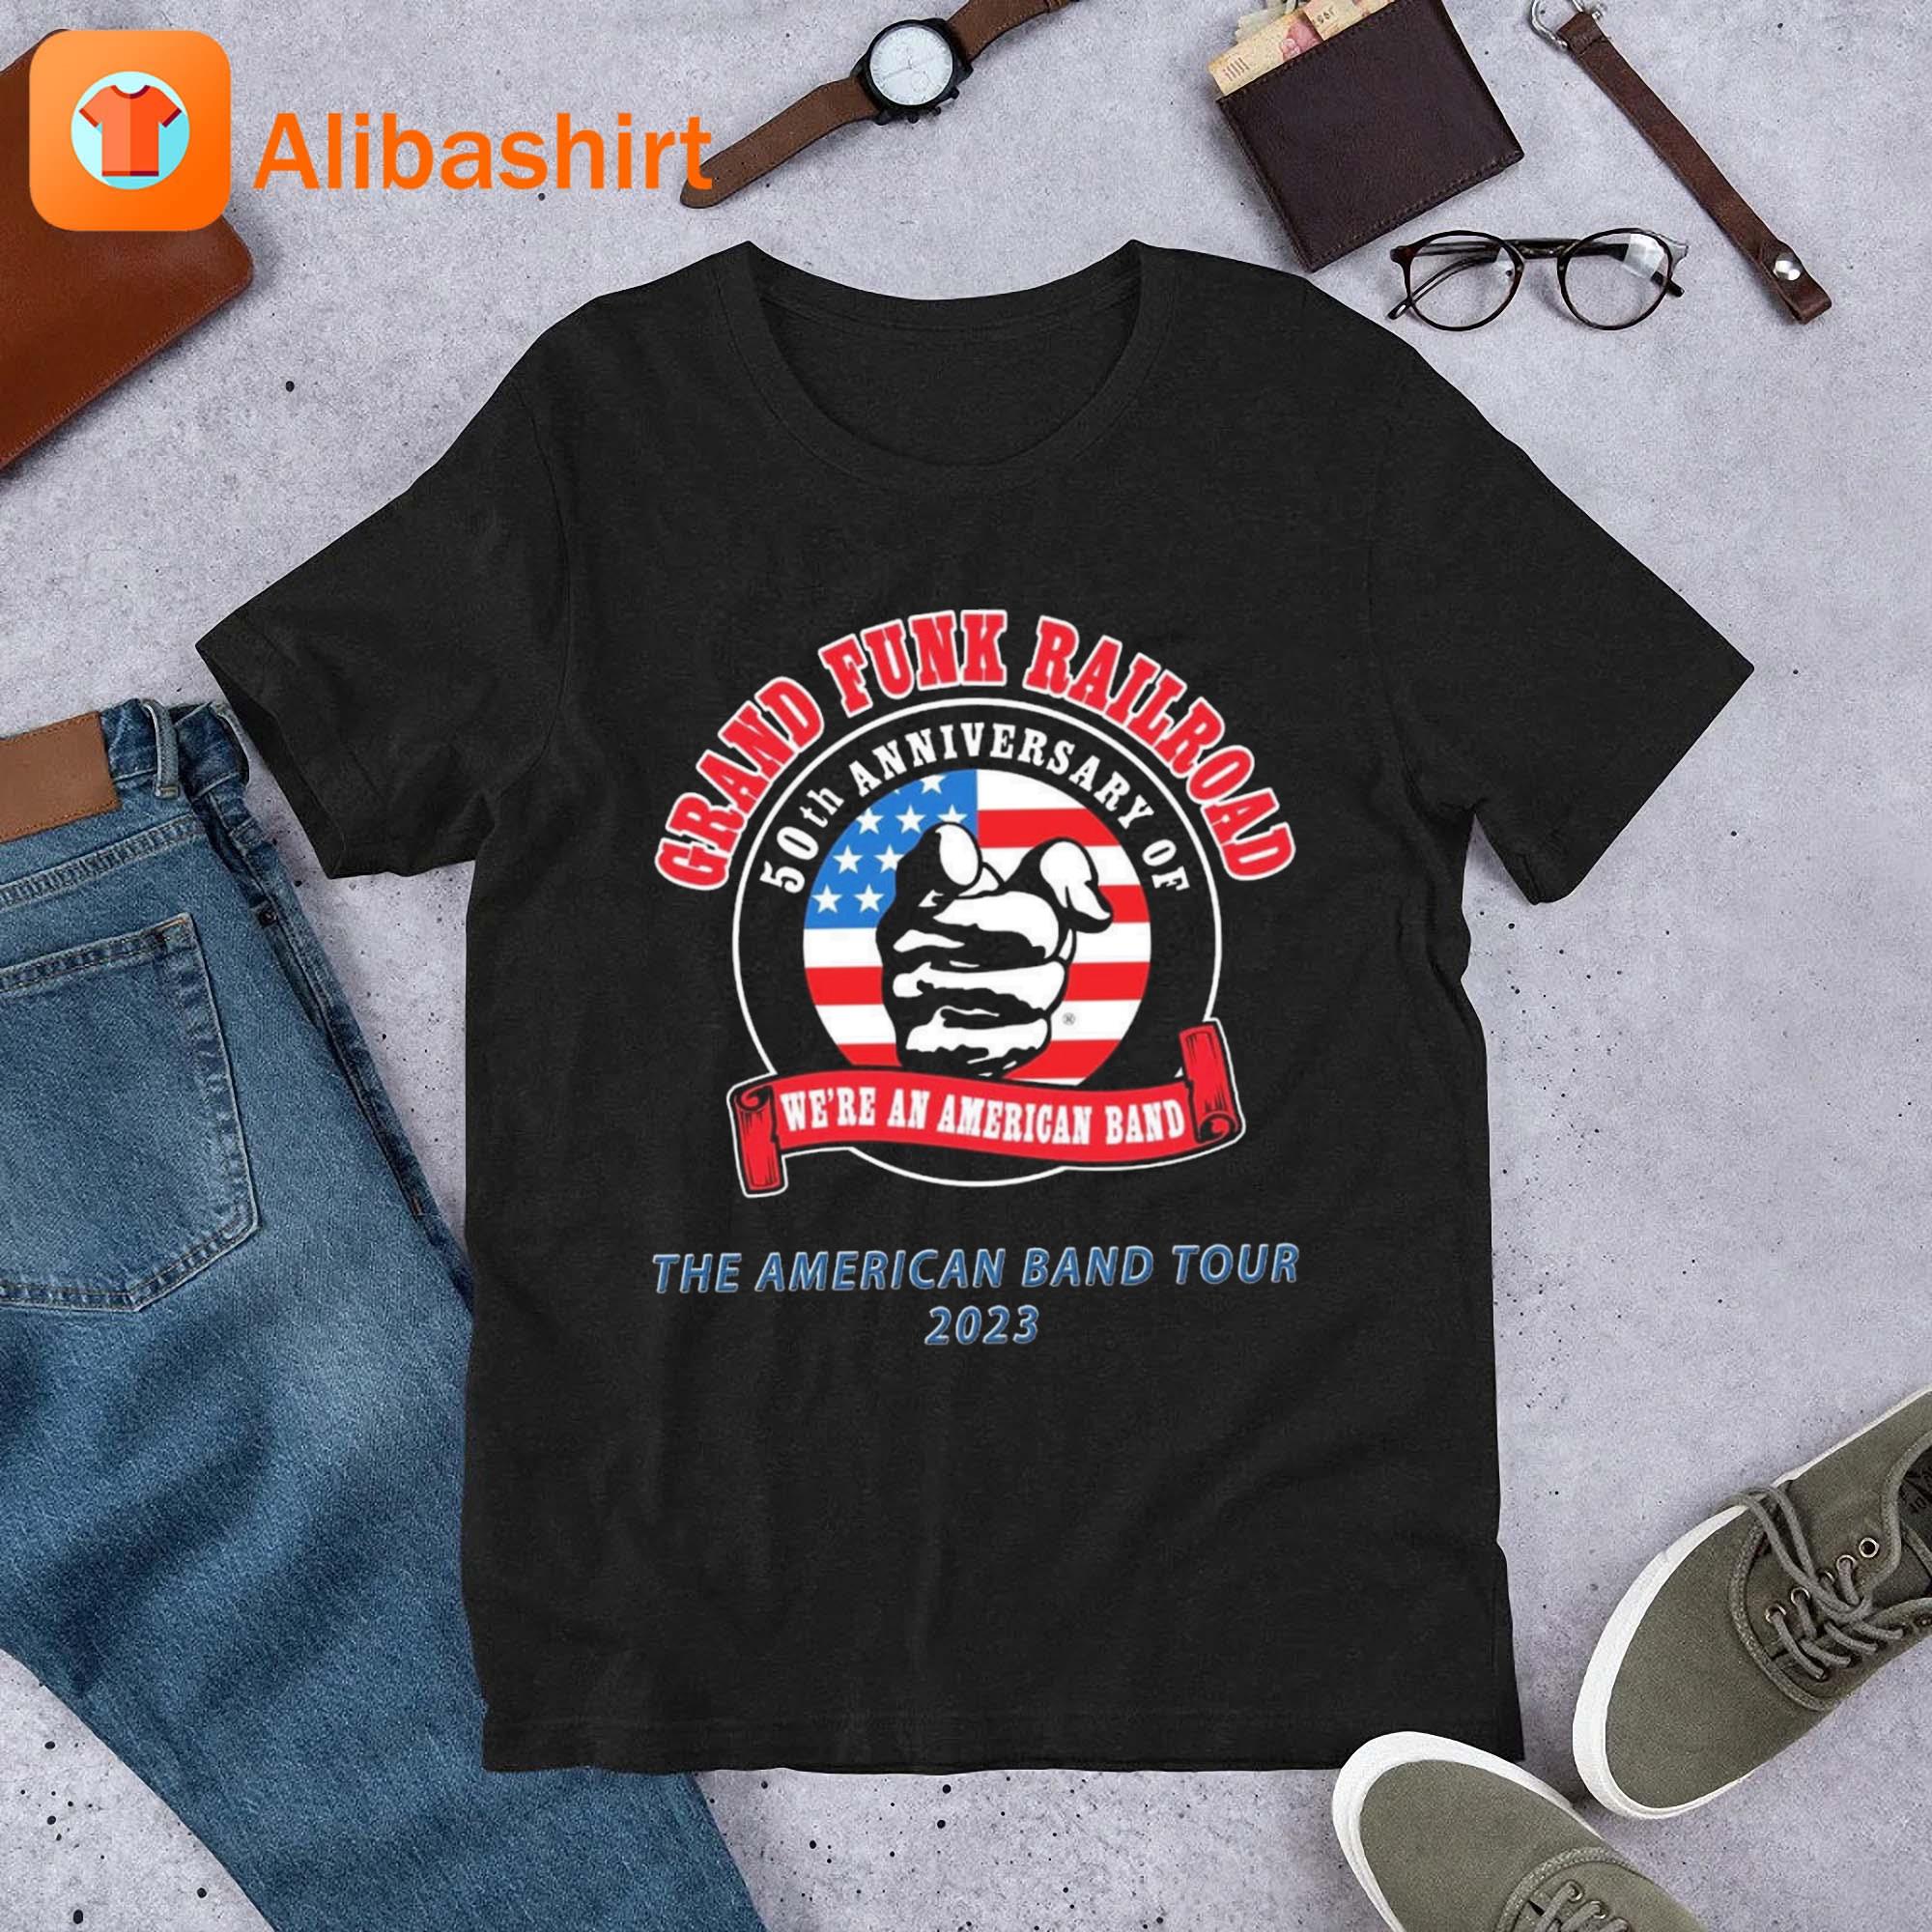 Grand Funk Railroad Celebrating We're An American Band 50th Anniversary With Tour 2023 Shirt